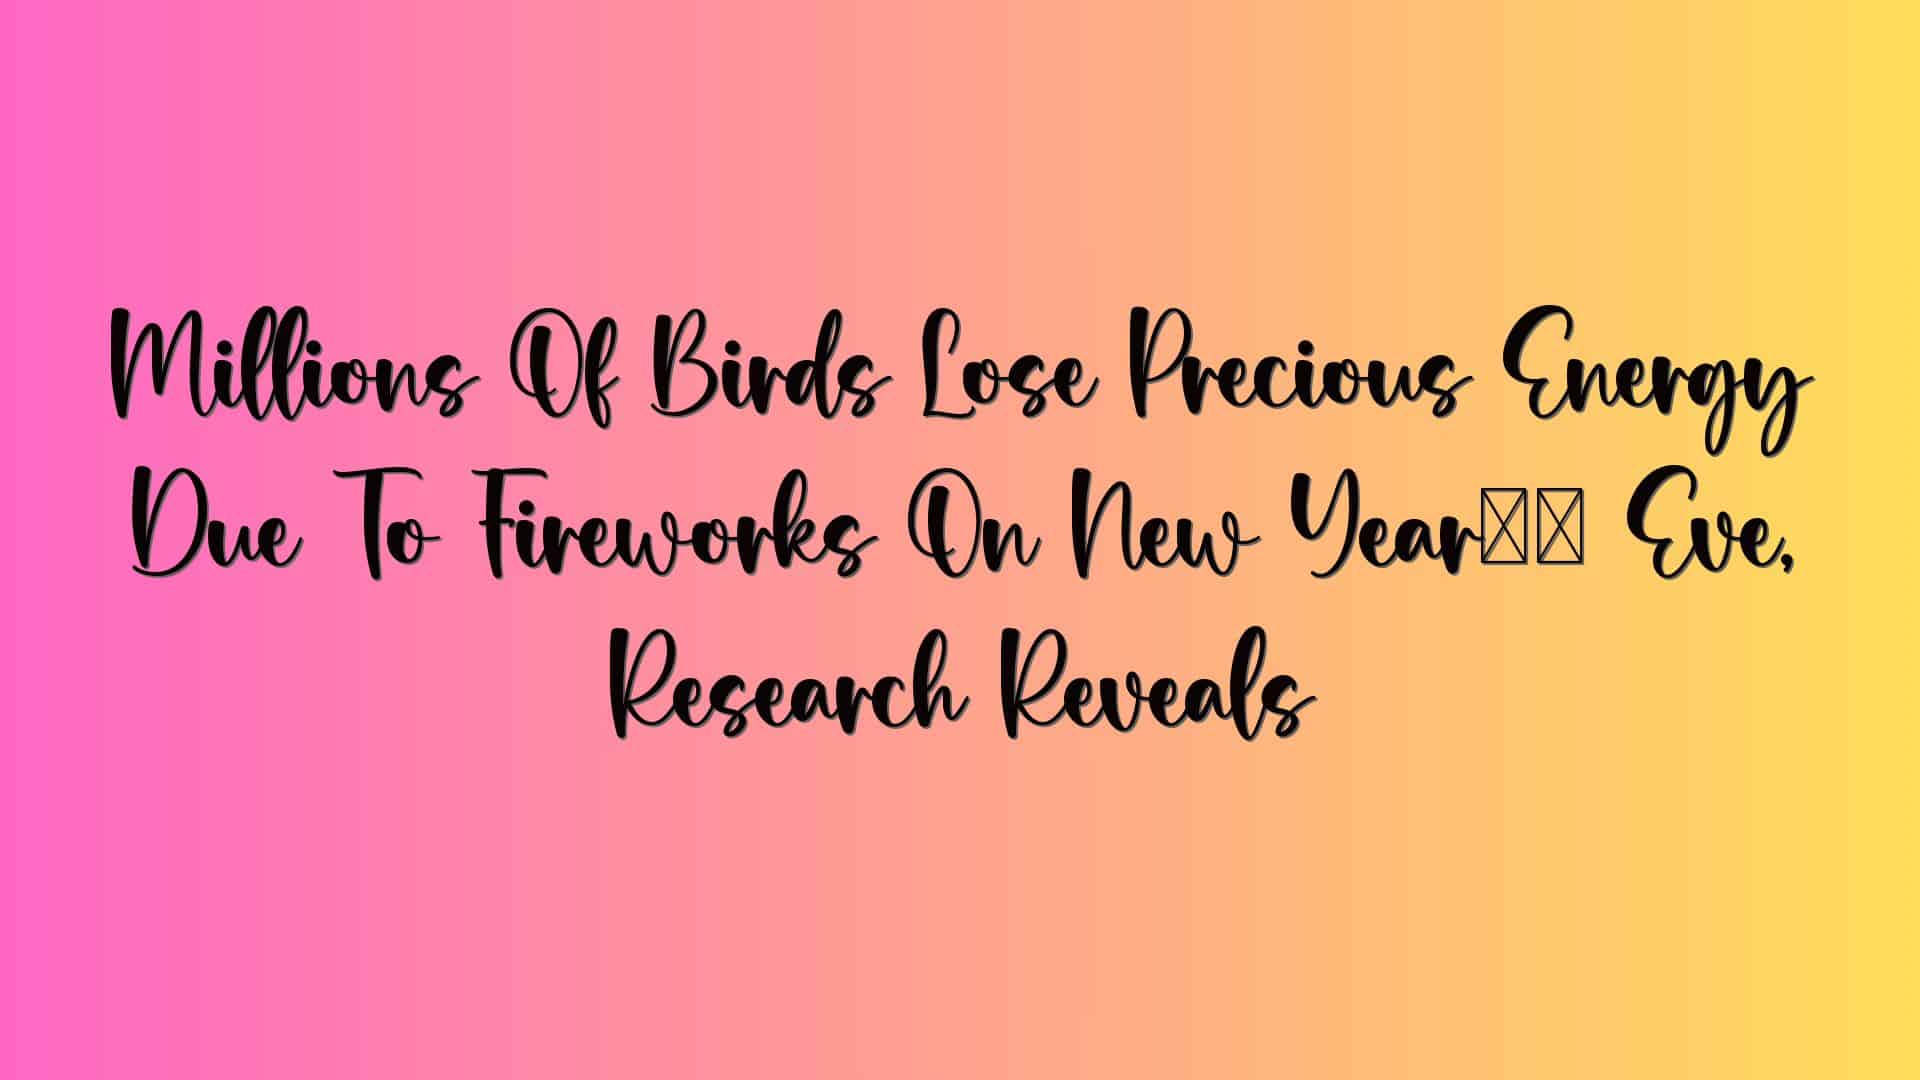 Millions Of Birds Lose Precious Energy Due To Fireworks On New Year’s Eve, Research Reveals